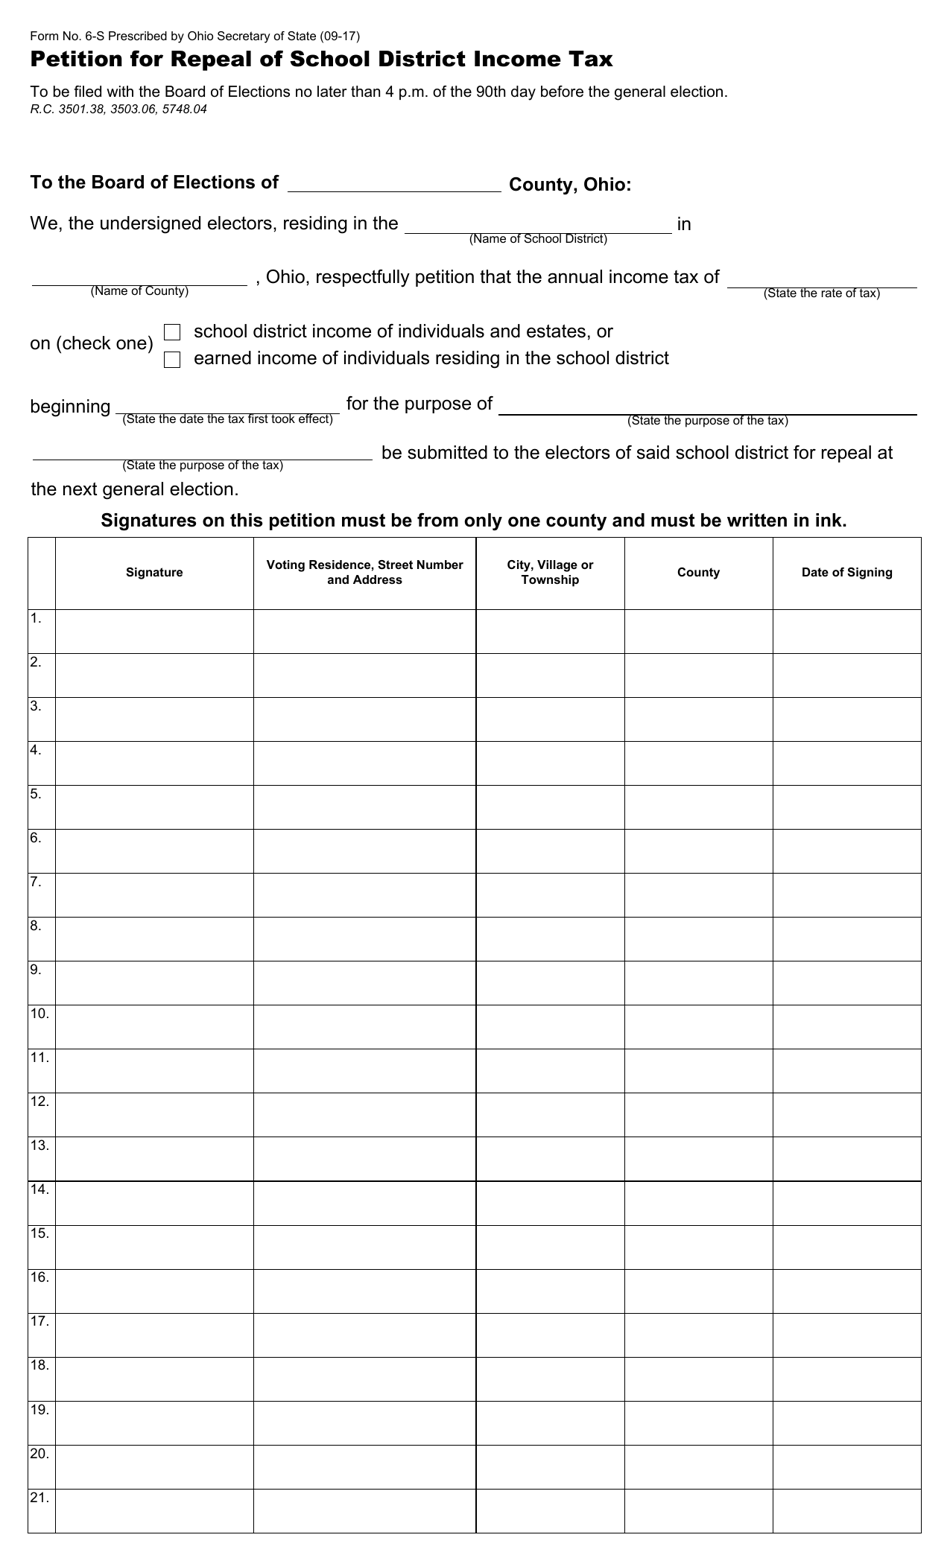 Form 6-S Petition for Repeal of School District Income Tax - Ohio, Page 1